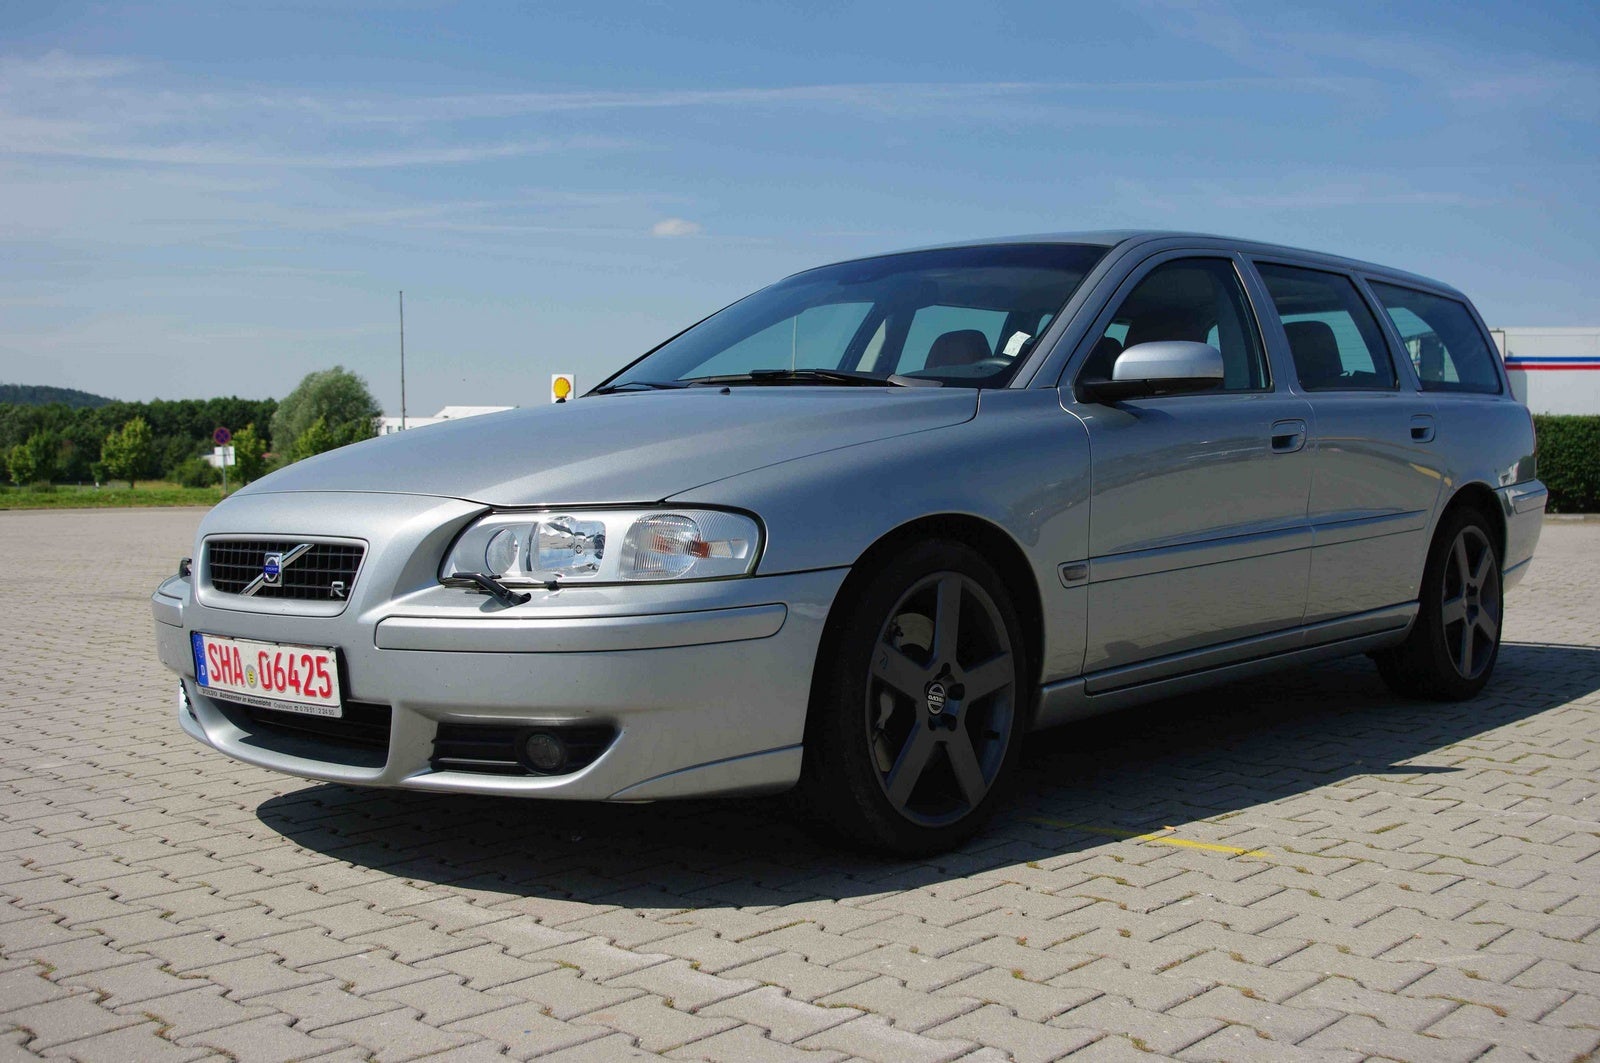  Volvo  on 2006 Volvo V70 R 4dr Wagon Awd   Pictures   2006 Volvo V70 R 4dr Wagon